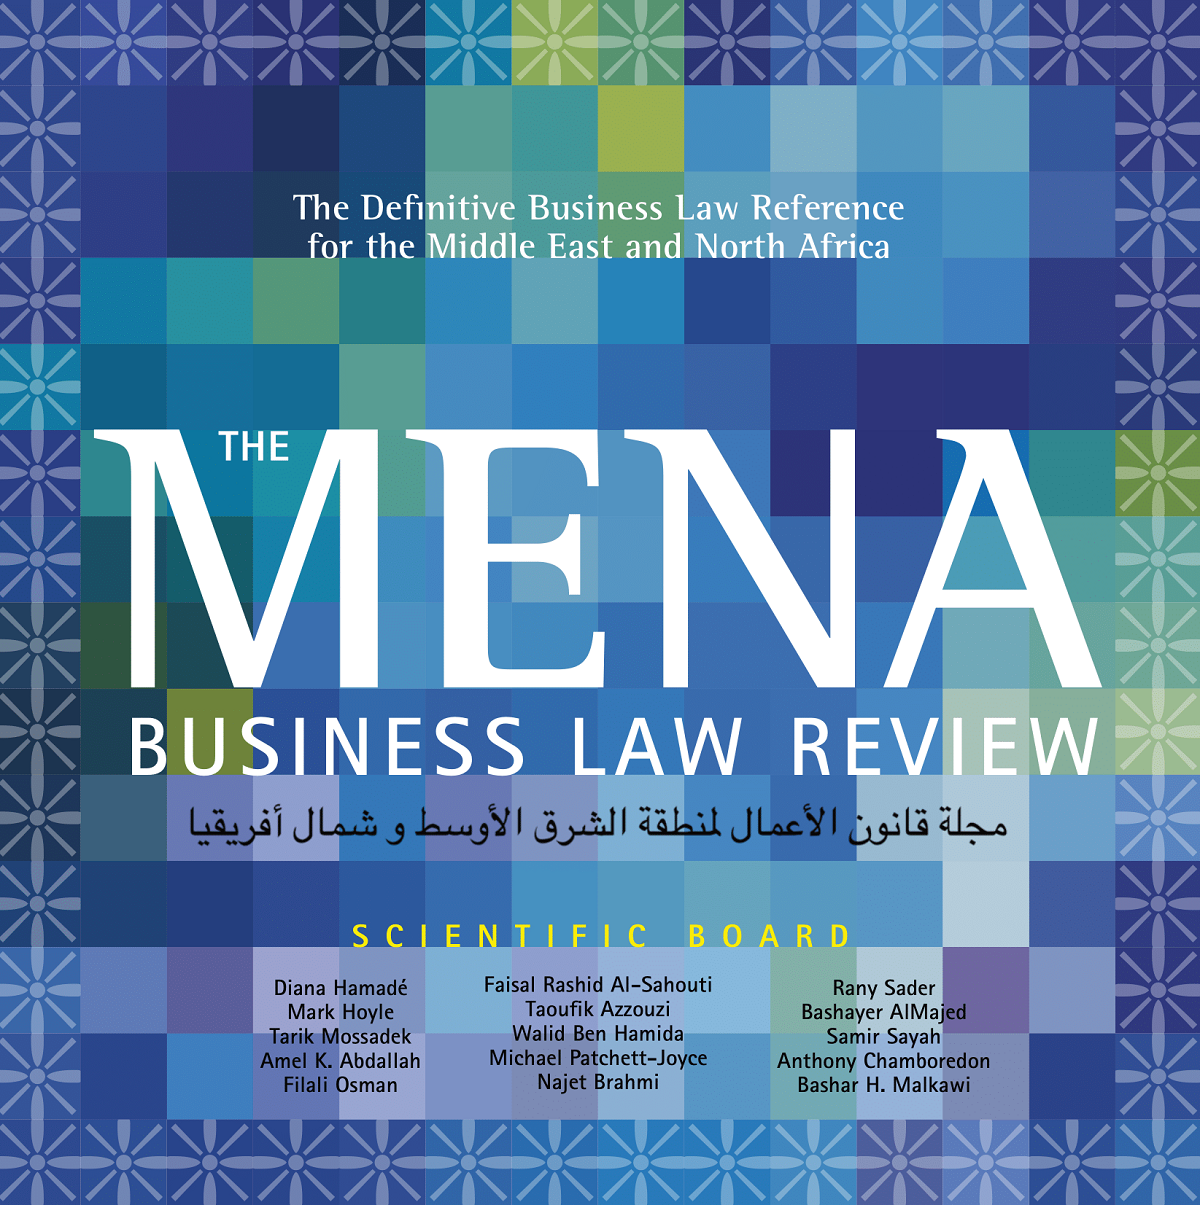 The MENA Business Law Review No. 03/2022 is out!